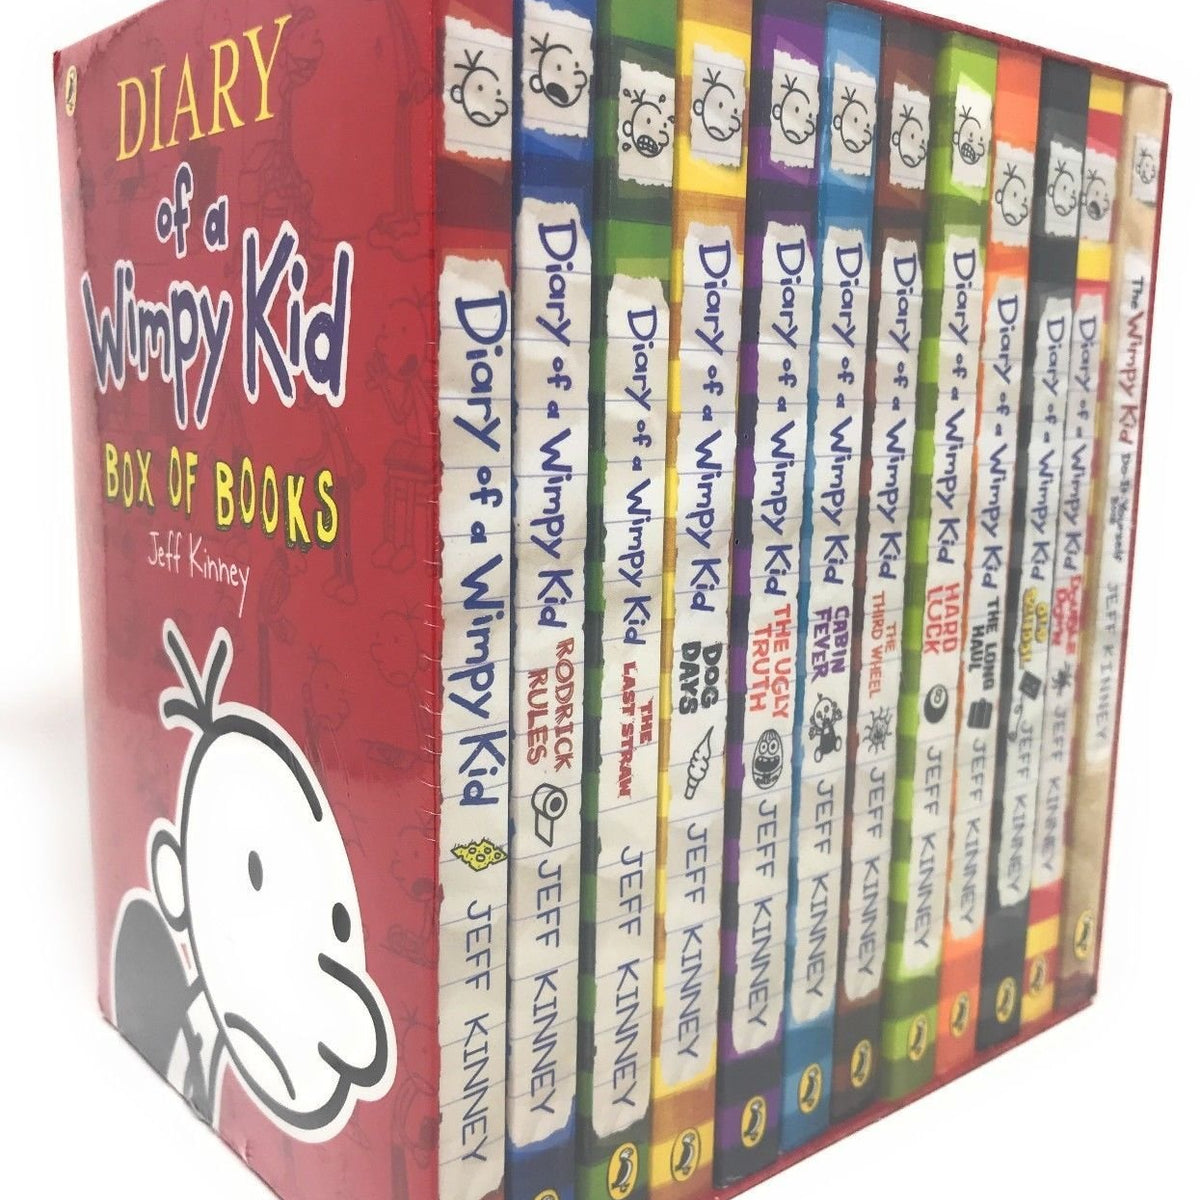 Diary of a Wimpy Kid 12 Books Complete Collection Set New(Diary Of a Wimpy  Kid,Rodrick Rules,The Last Straw,Dog Days,The Ugly Truth,Cabin Fever,The  Third Wheel,Hard Luck,The Long Haul,Old School..etc: 9780241381229: Books 